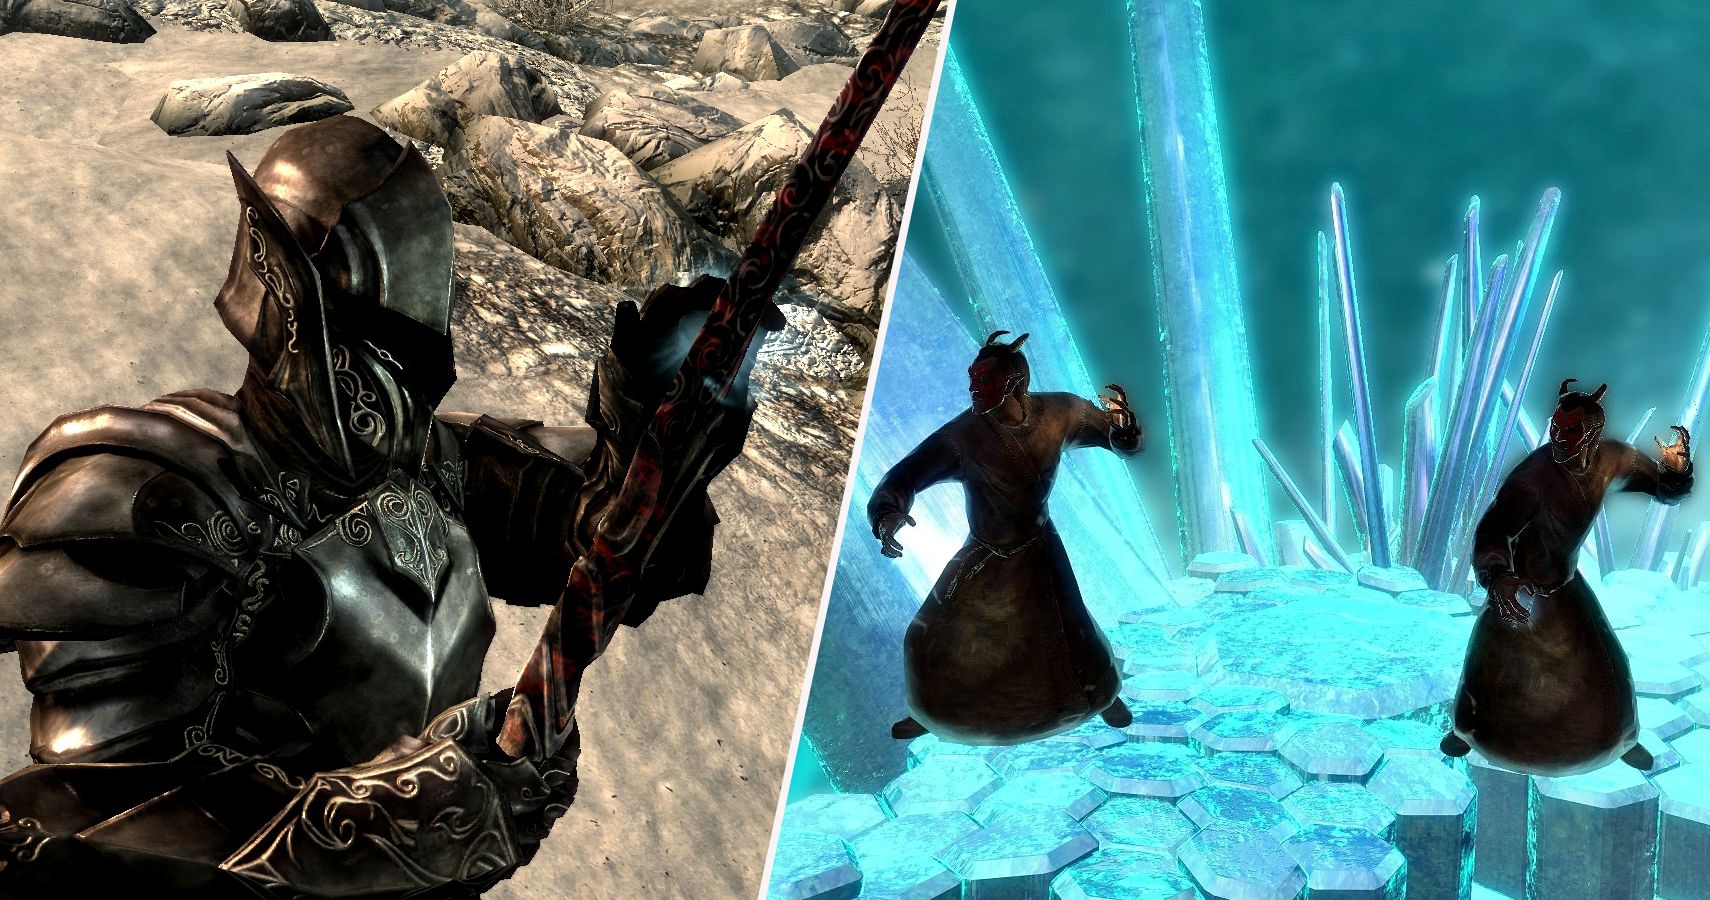 Skyrim: 15 Hidden Bosses Players Need To Find (And 5 That Aren't Worth It)